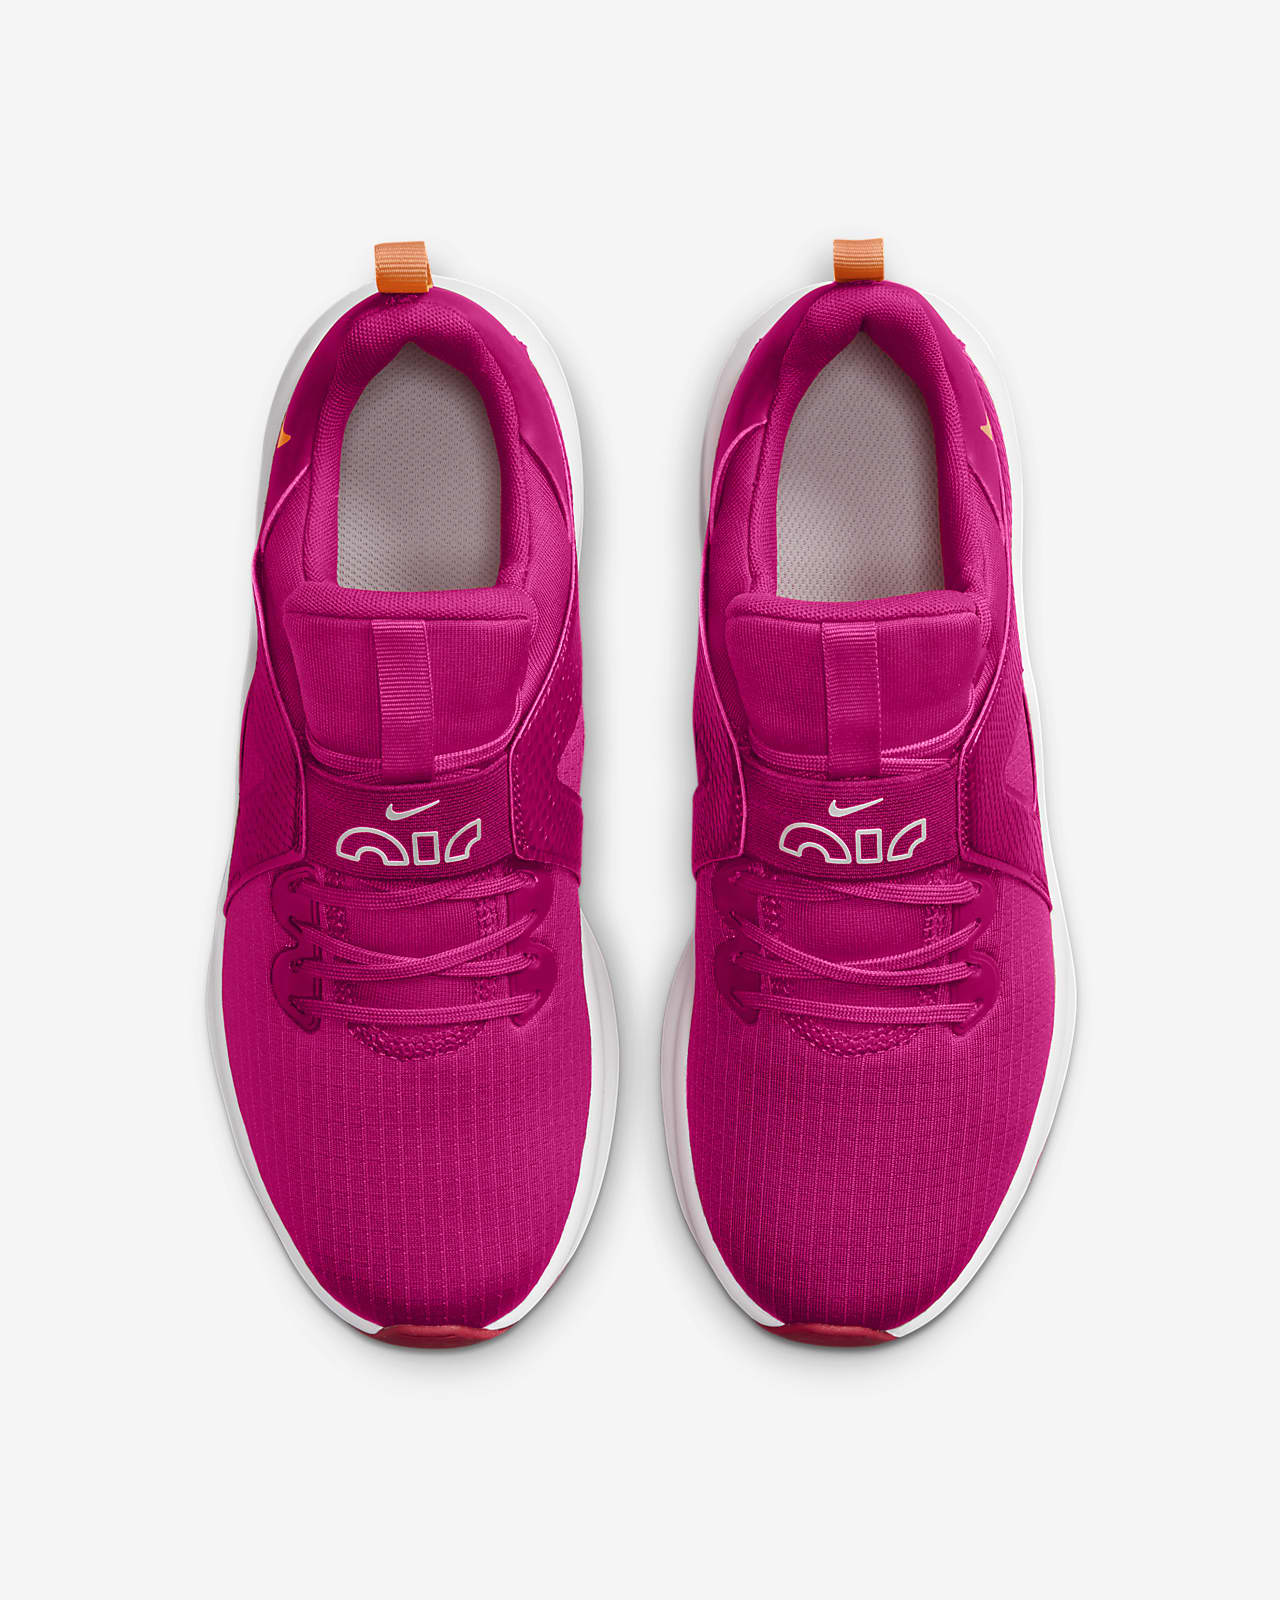 Nike Air Max Bella TR 5 Women's Workout Shoes.